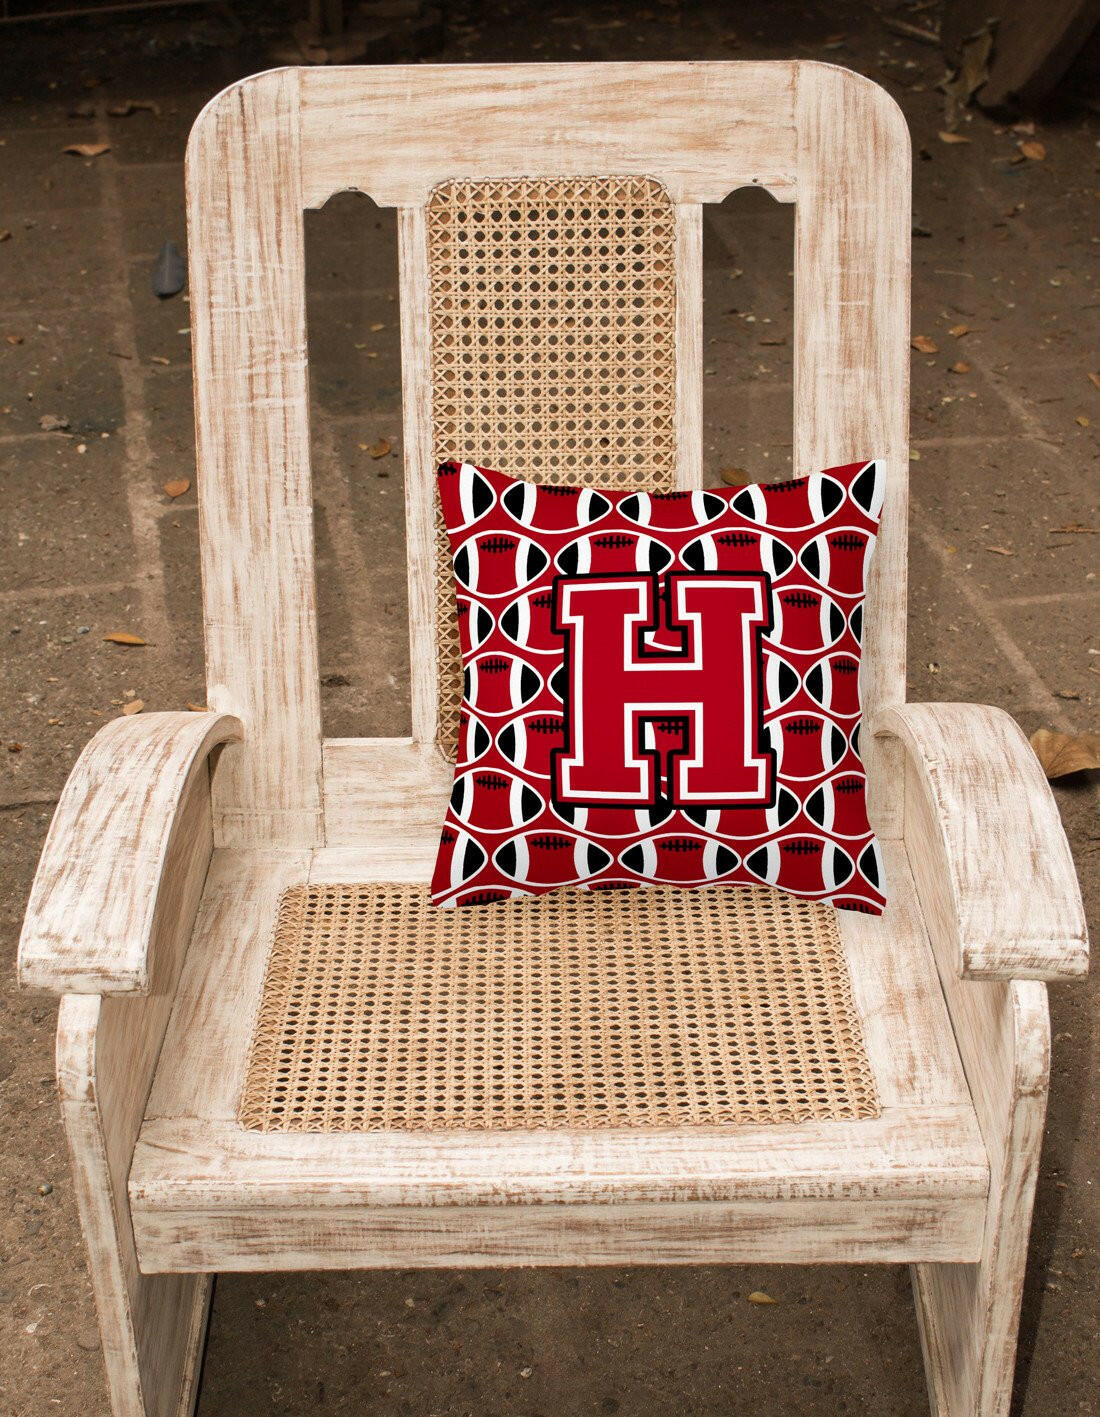 Letter H Football Red, Black and White Fabric Decorative Pillow CJ1073-HPW1414 by Caroline's Treasures